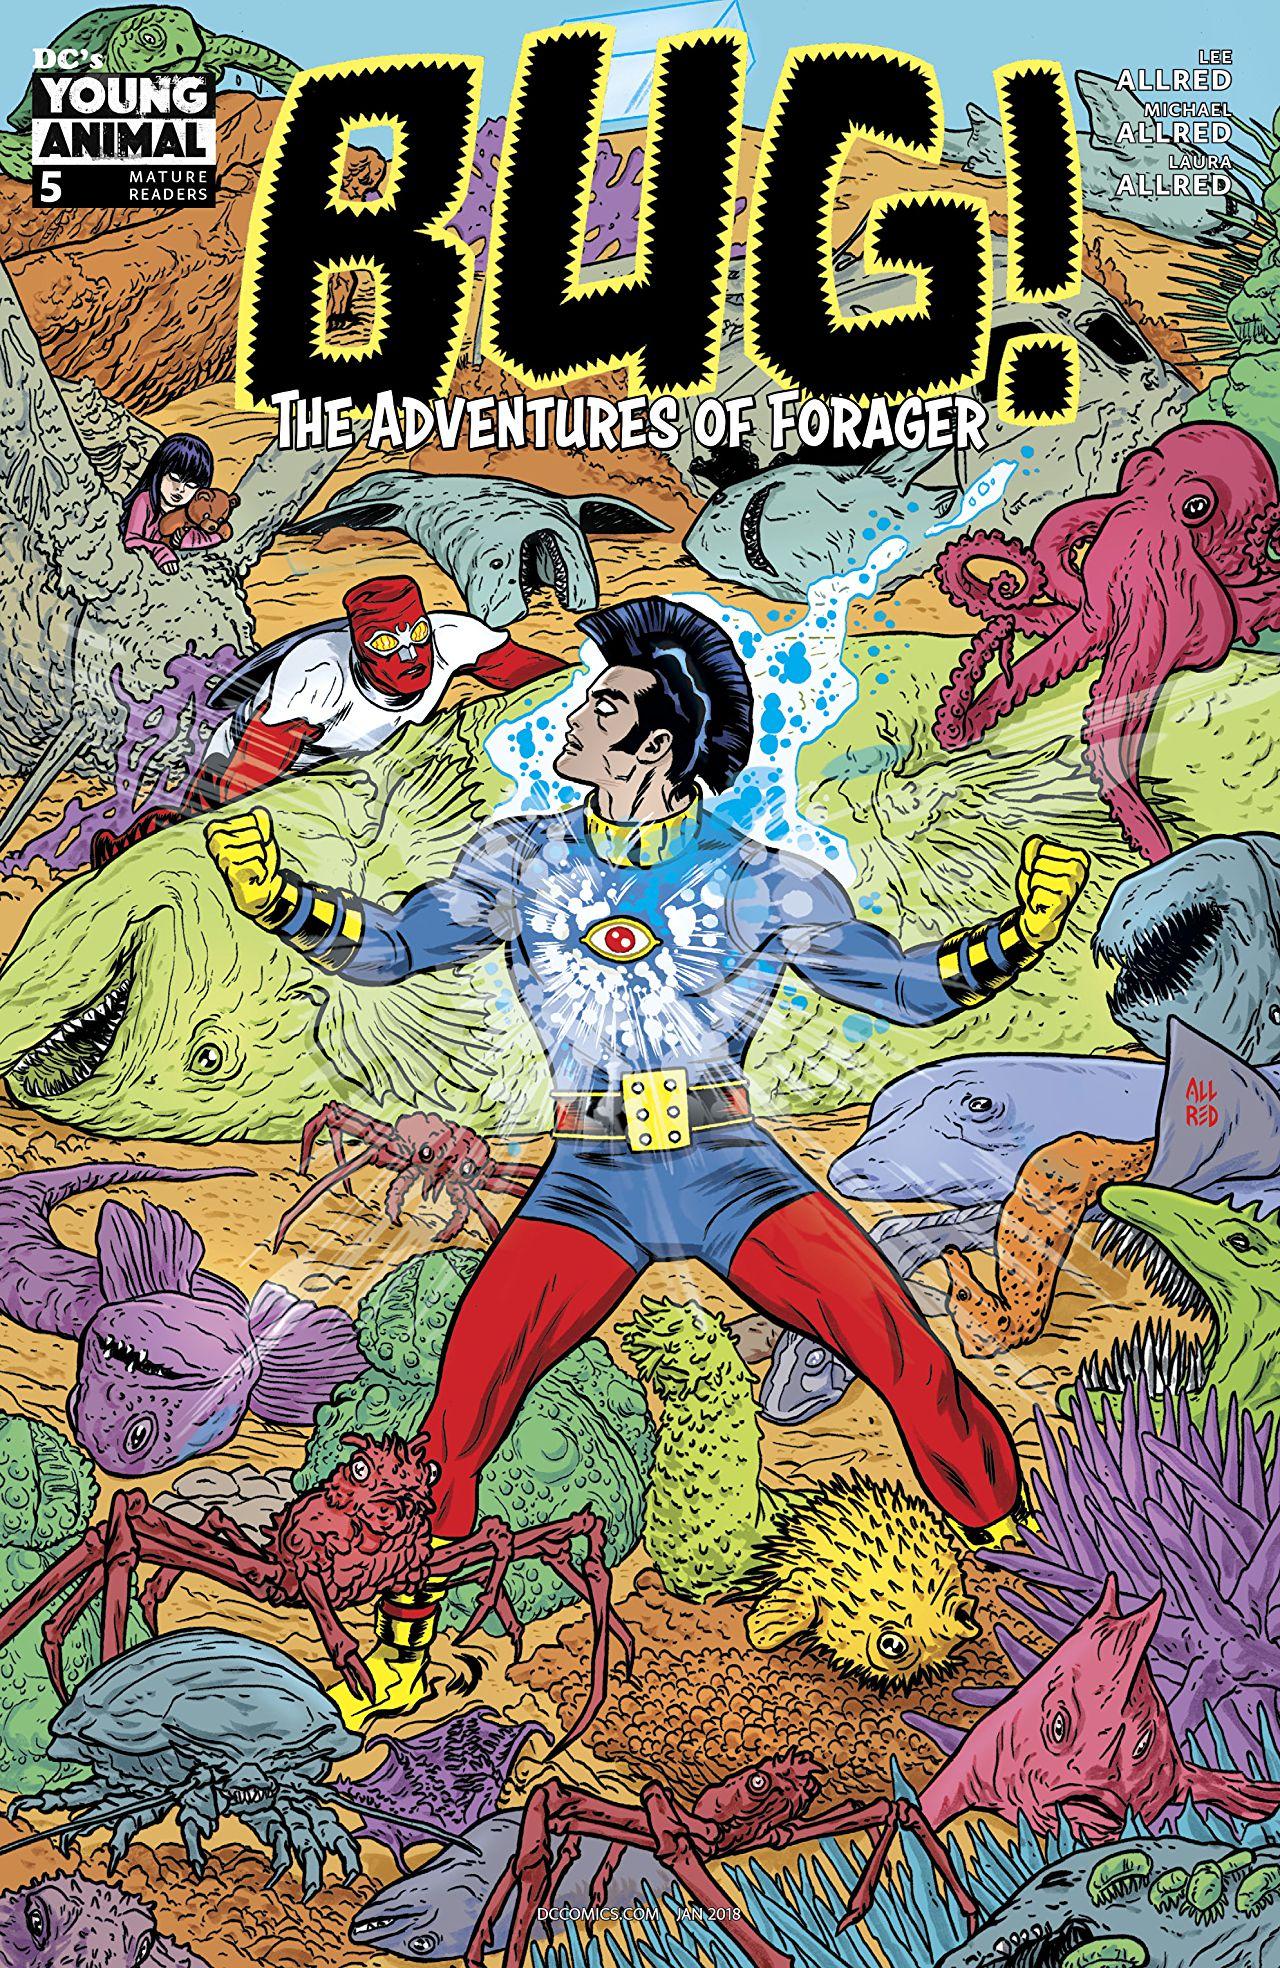 Bug! The Adventures of Forager Vol. 1 #5